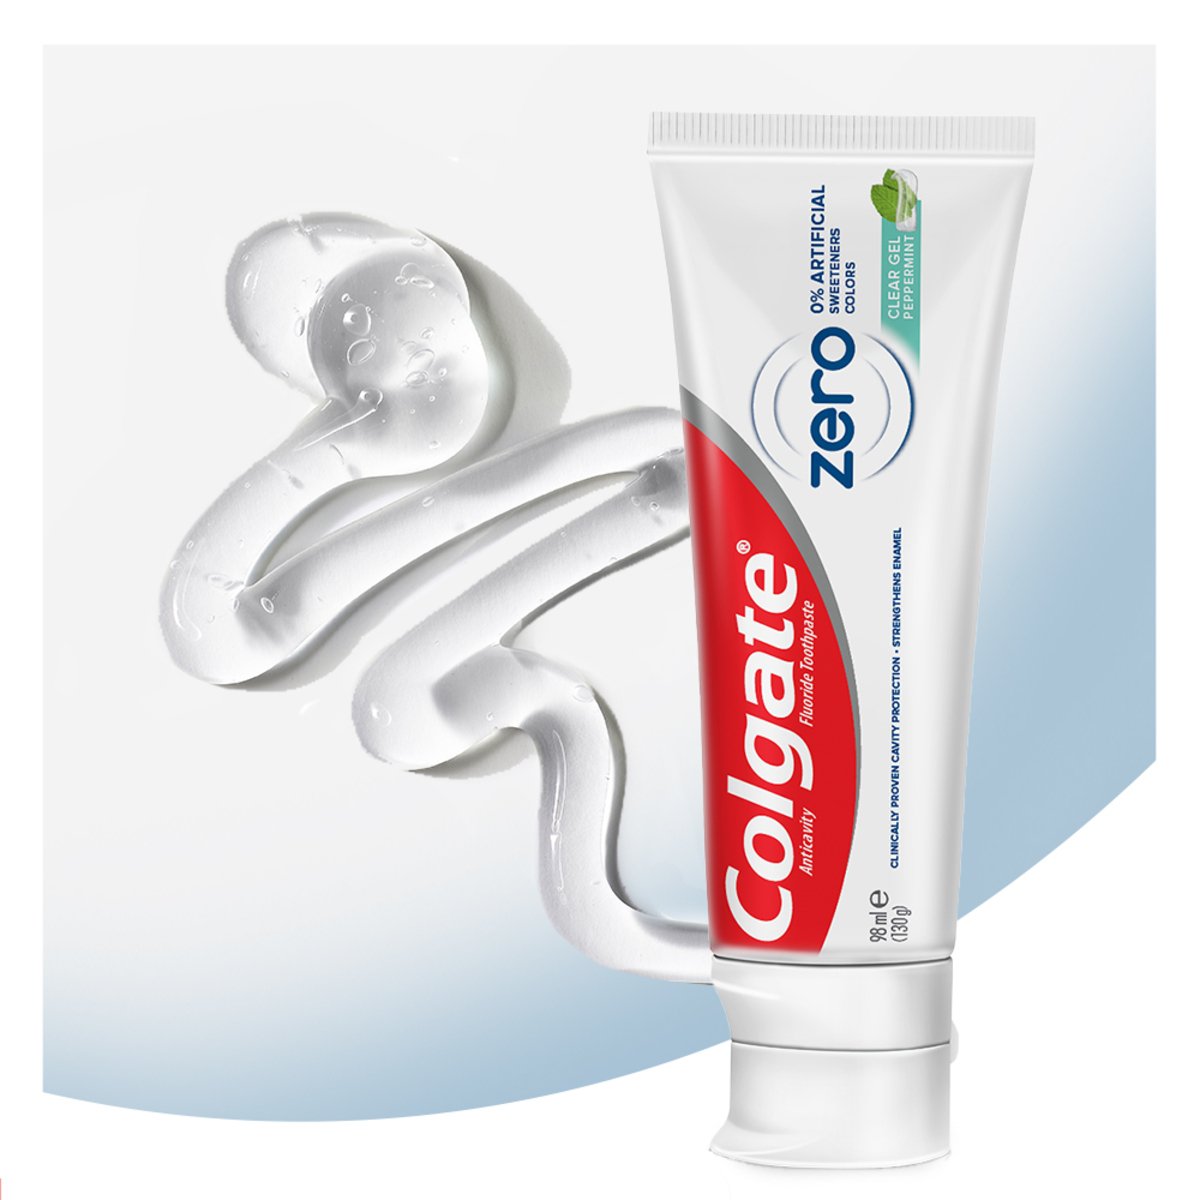 Colgate Zero % Artificial Colours and Sweeteners Peppermint Clear Gel Toothpaste 98 ml